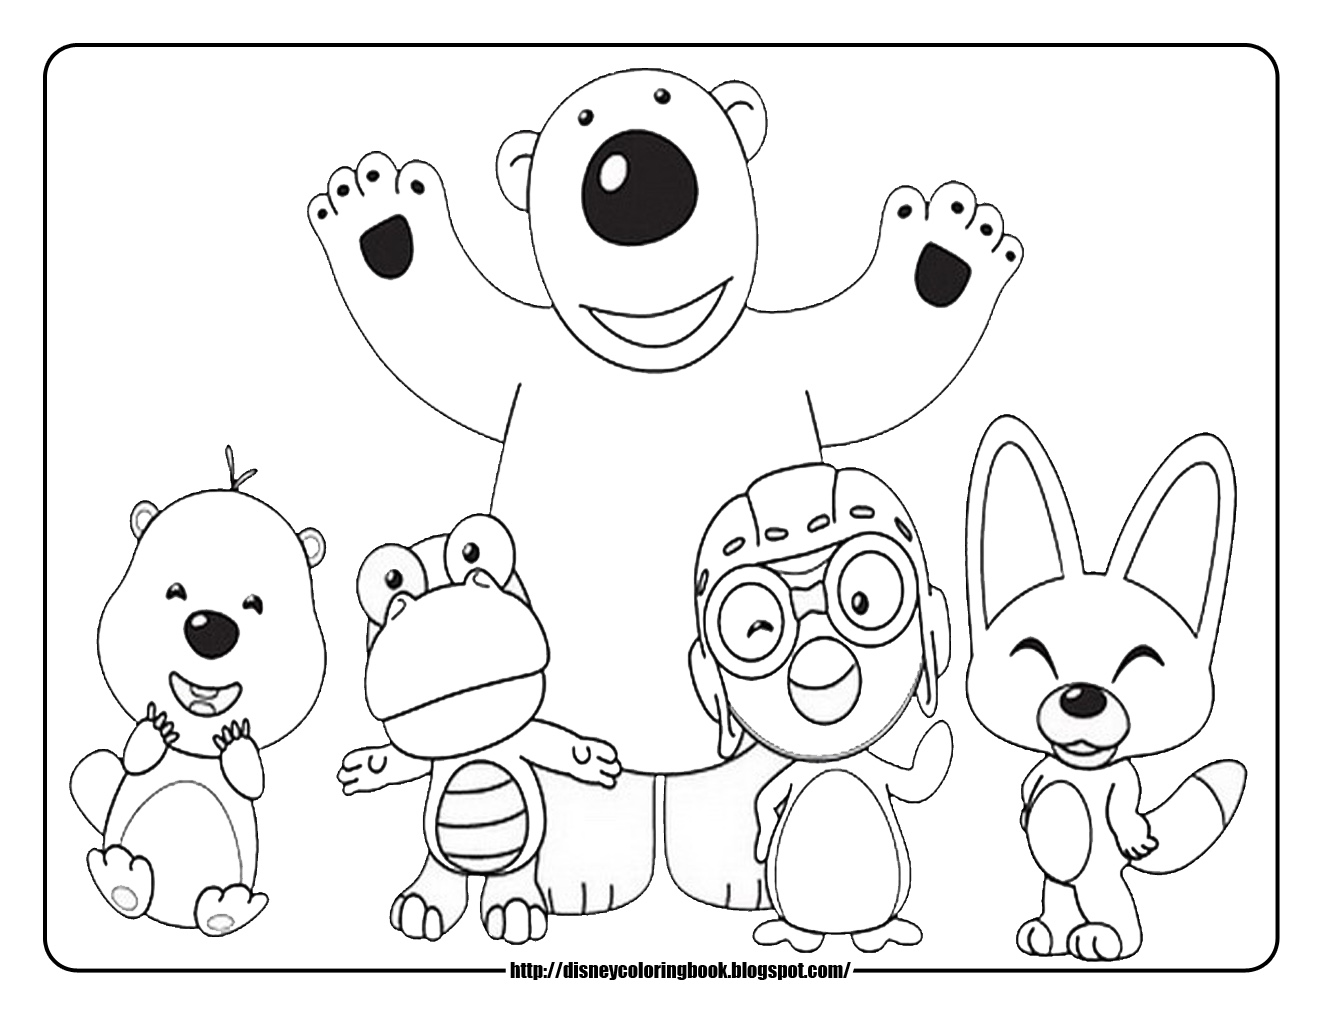 Pororo the Little Penguin: Free Disney Coloring Sheets | Team colors